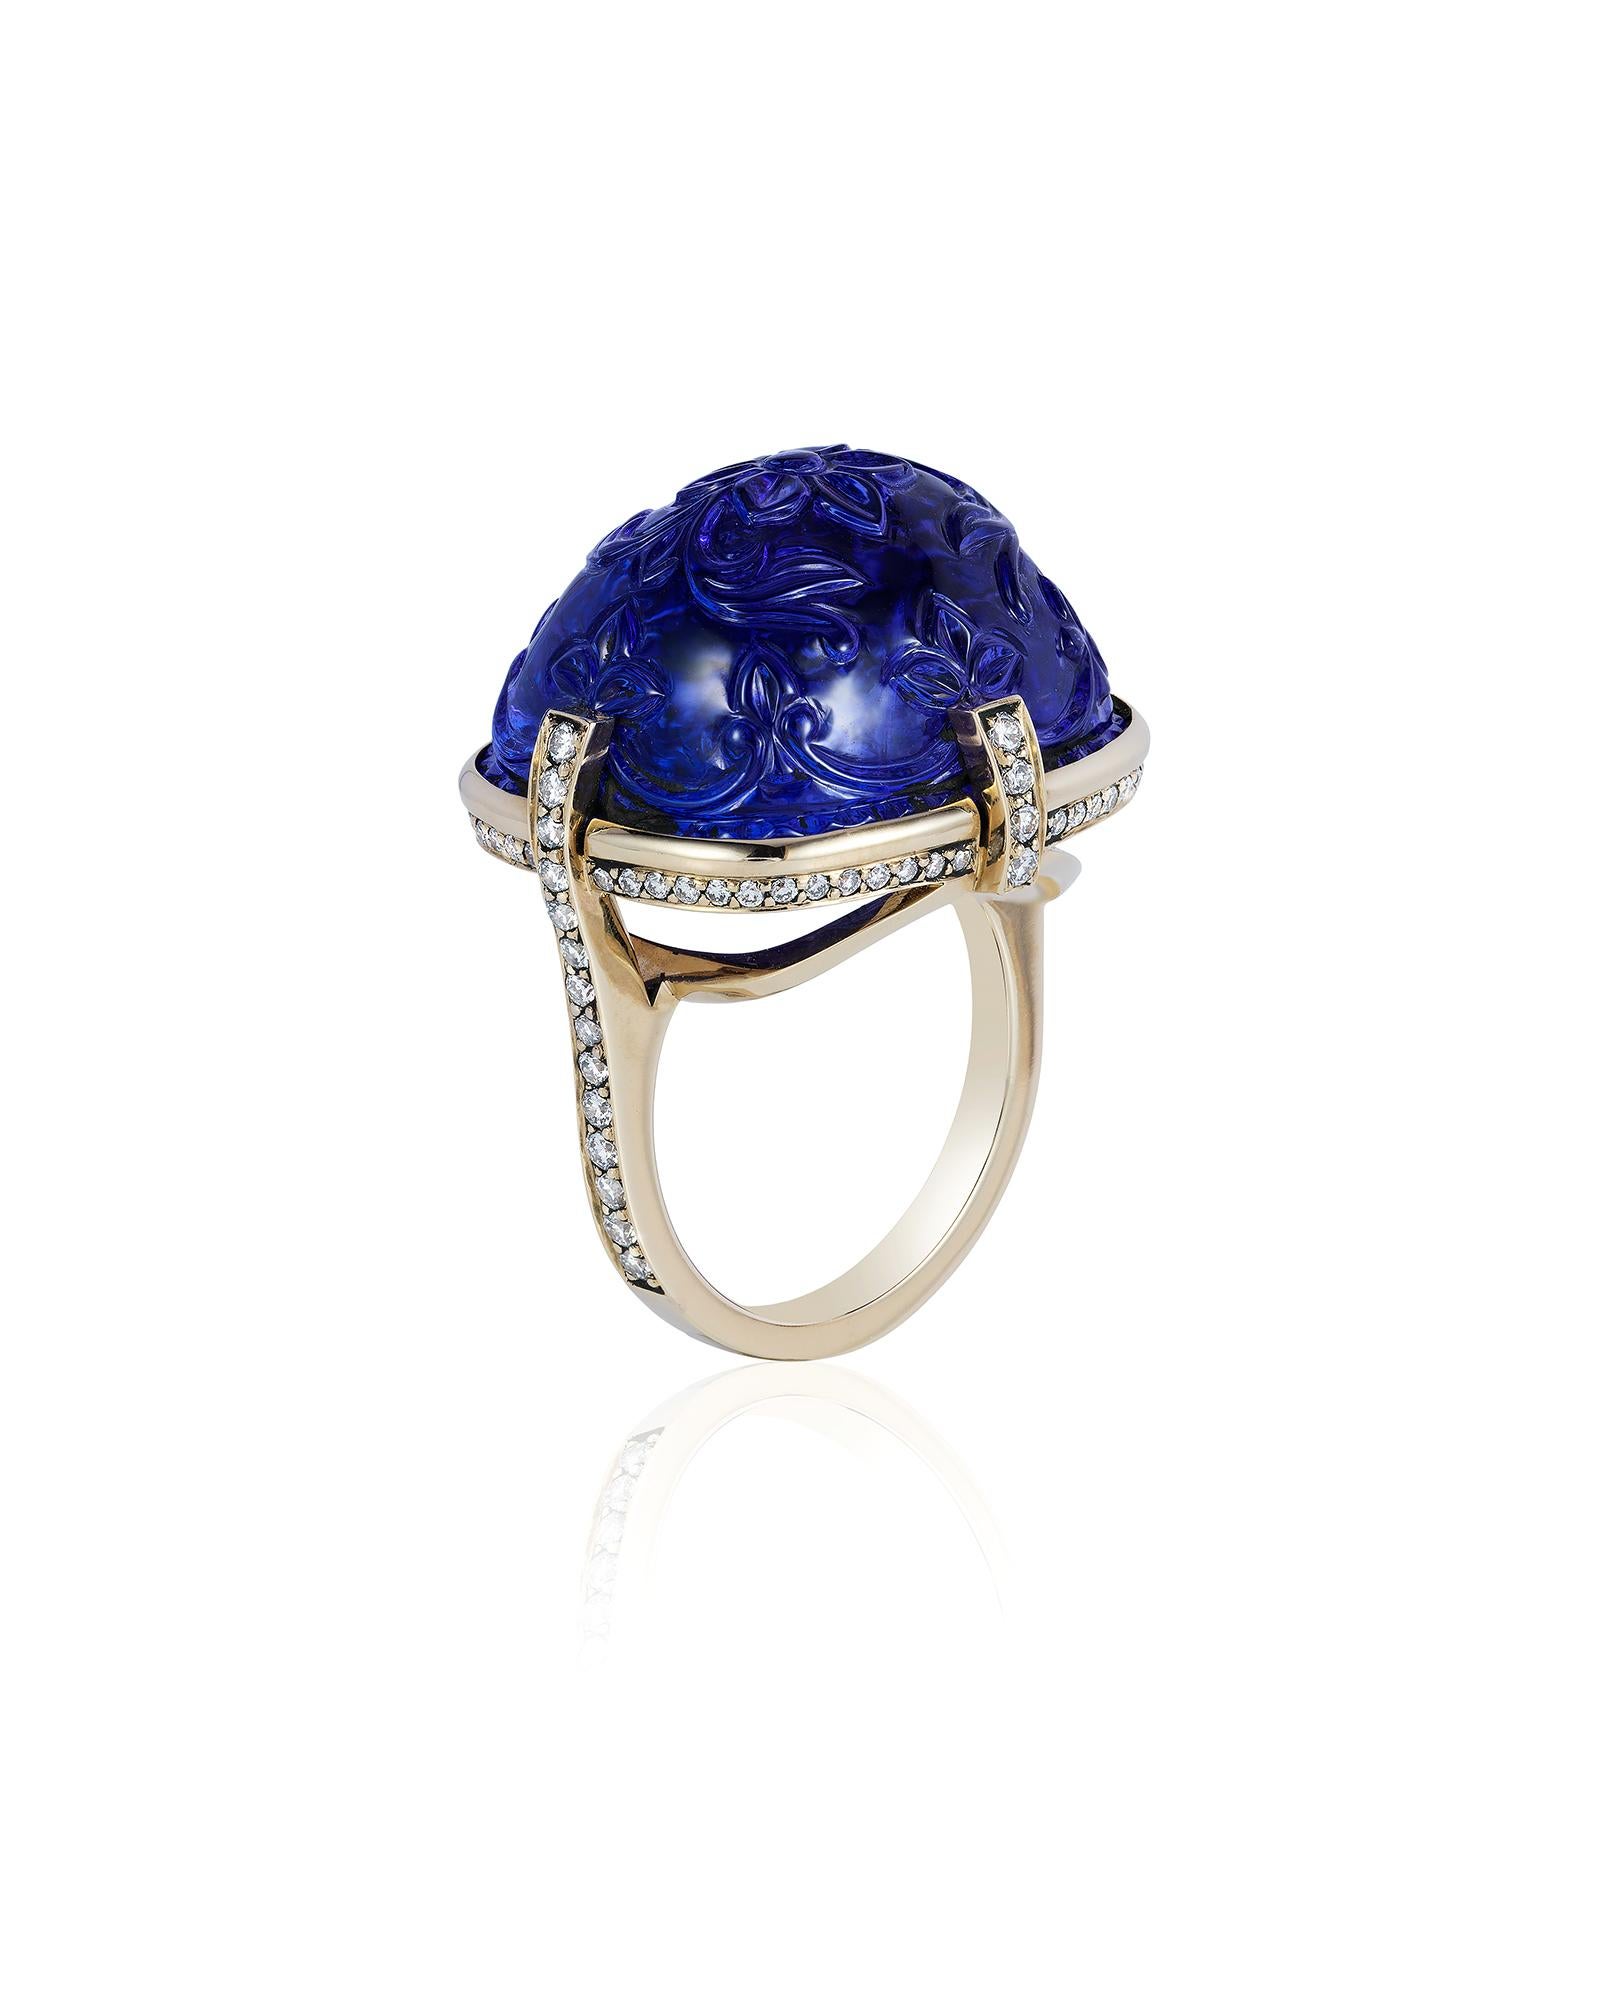 Tanzanite Sugarloaf Carved 4 prong Ring in 18K White Gold with Diamonds, from 'G-One' Collection. Our G-One Collection undeniably carries the most special pieces of Goshwara. The sought-after, one-of-a-kind pieces speak to each unique personality of